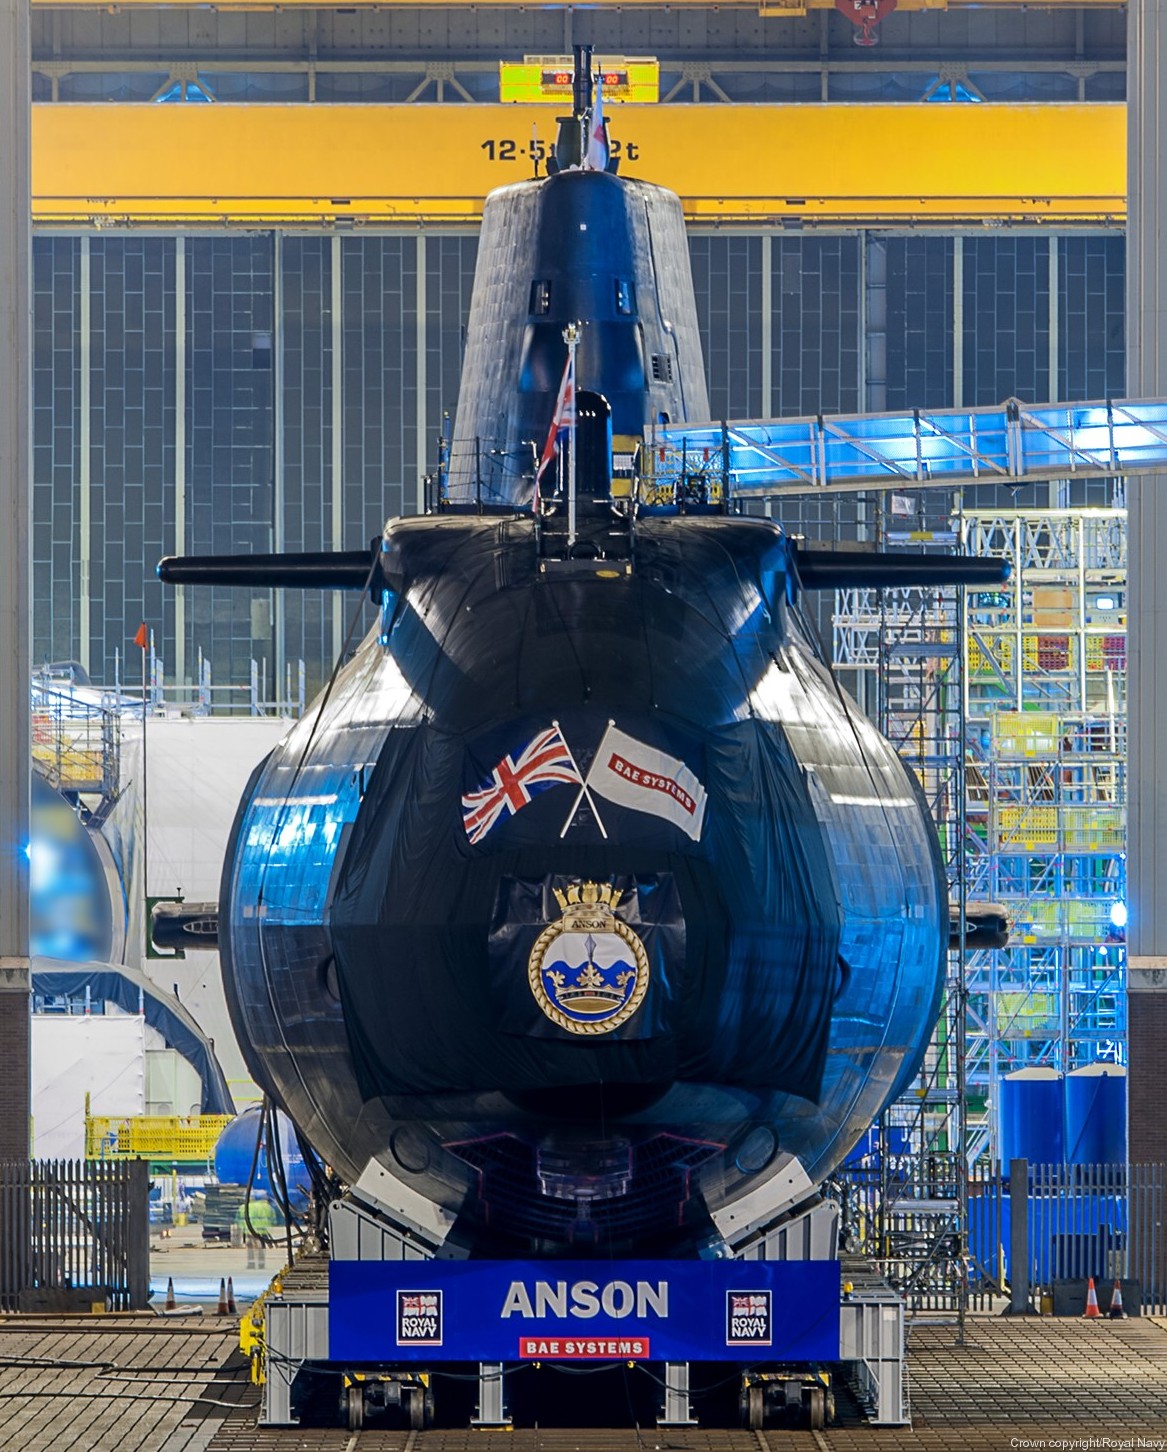 s123 hms anson s-123 astute class attack submarine ssn hunter killer royal navy 03 roll out barrow in furness bae